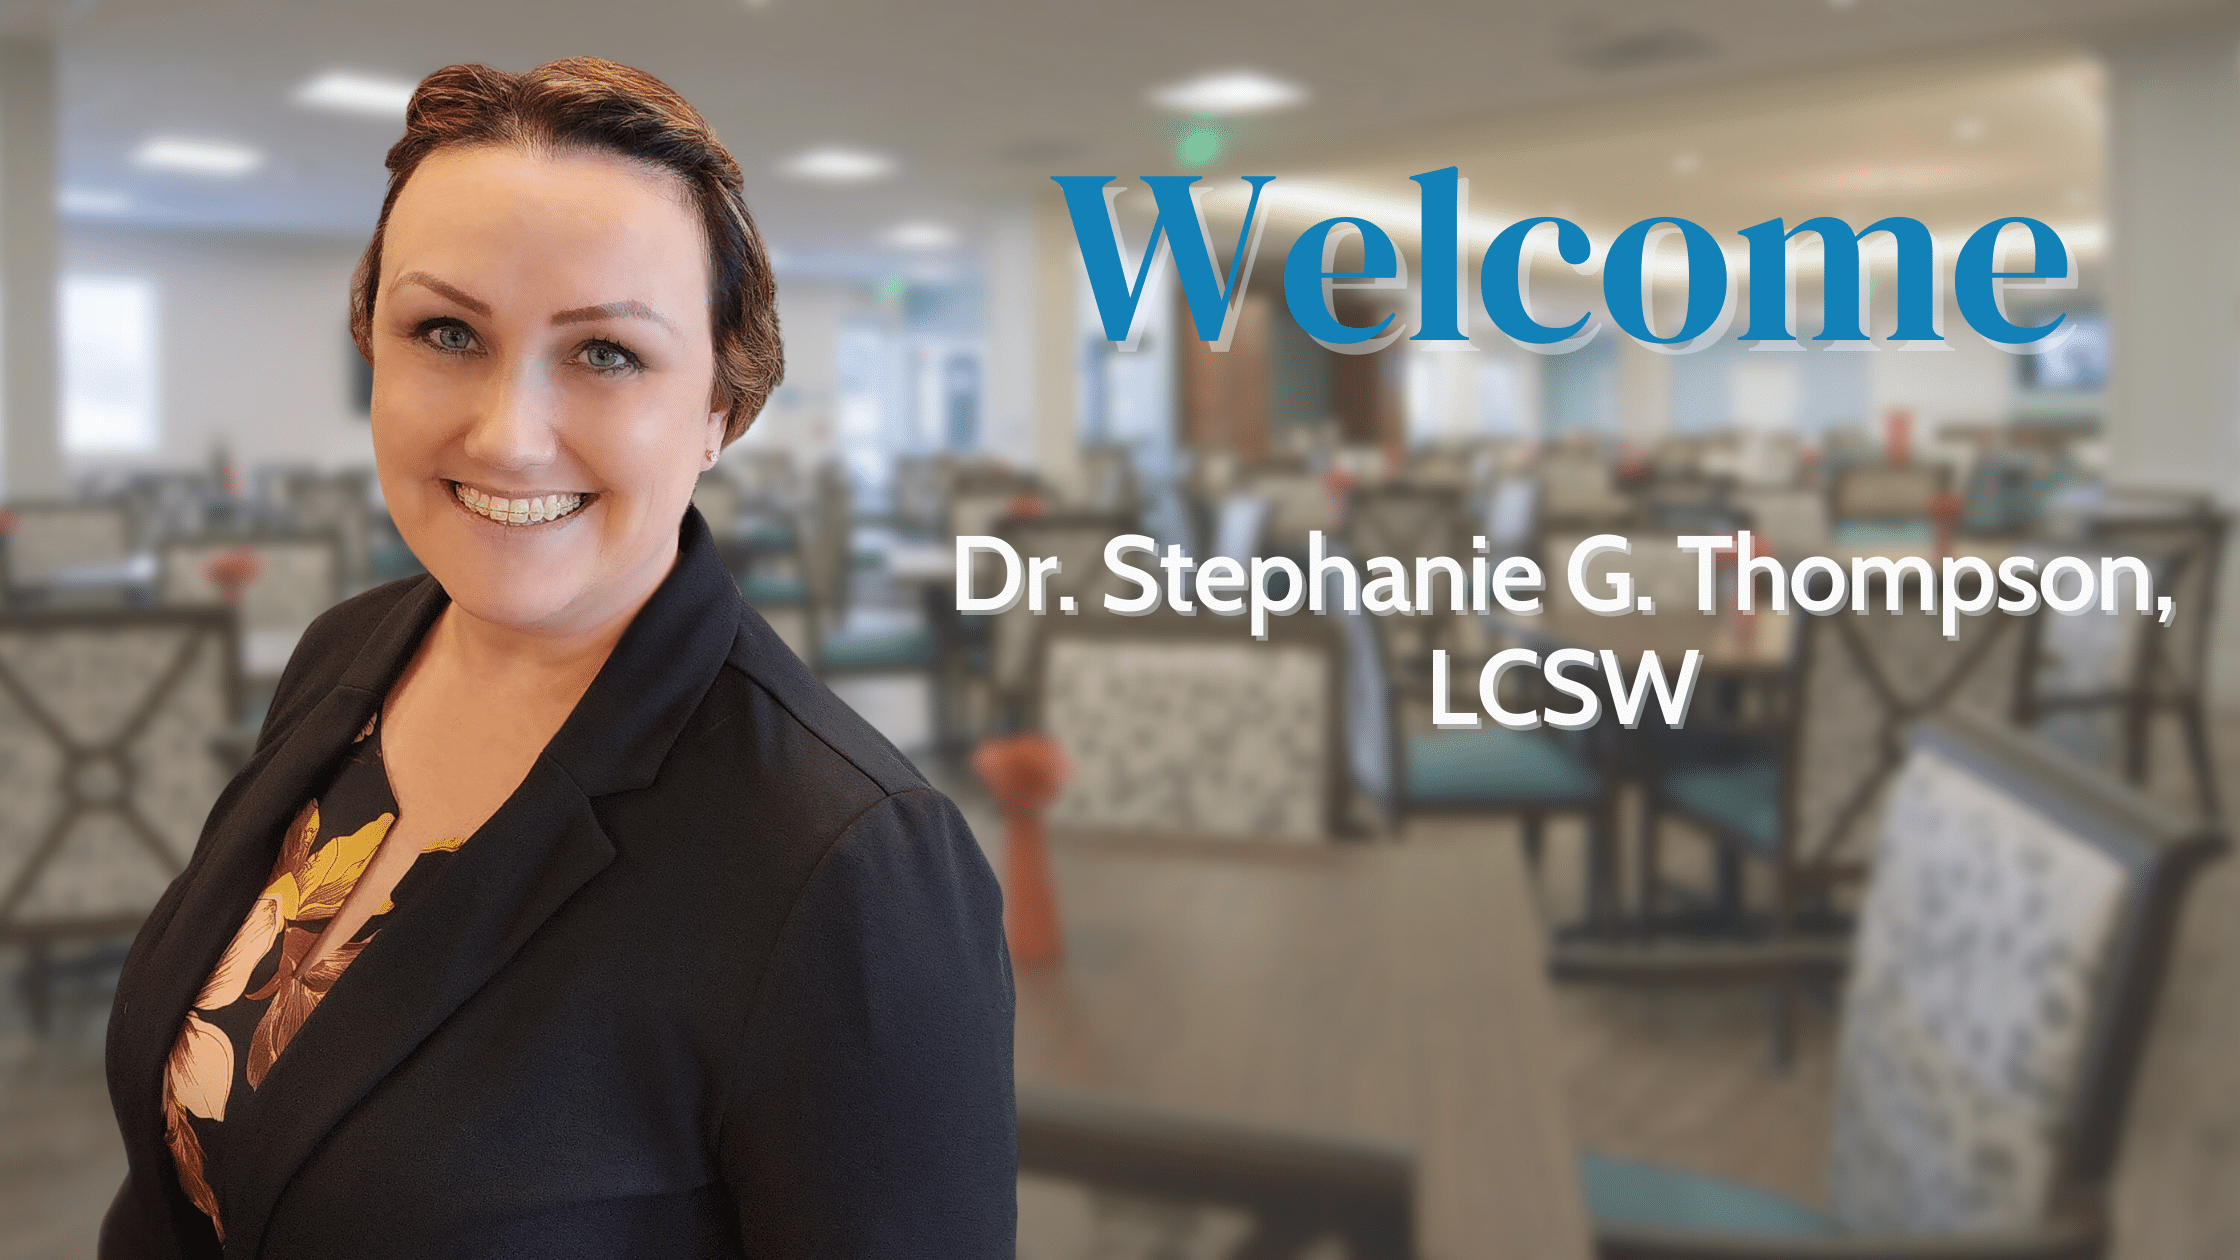 Dr. Stephanie Thompson headshot with word Welcome in blue and Dr. Stephanie G. Thompson, LCSW in white in front of a blurred background of the West PACE Center